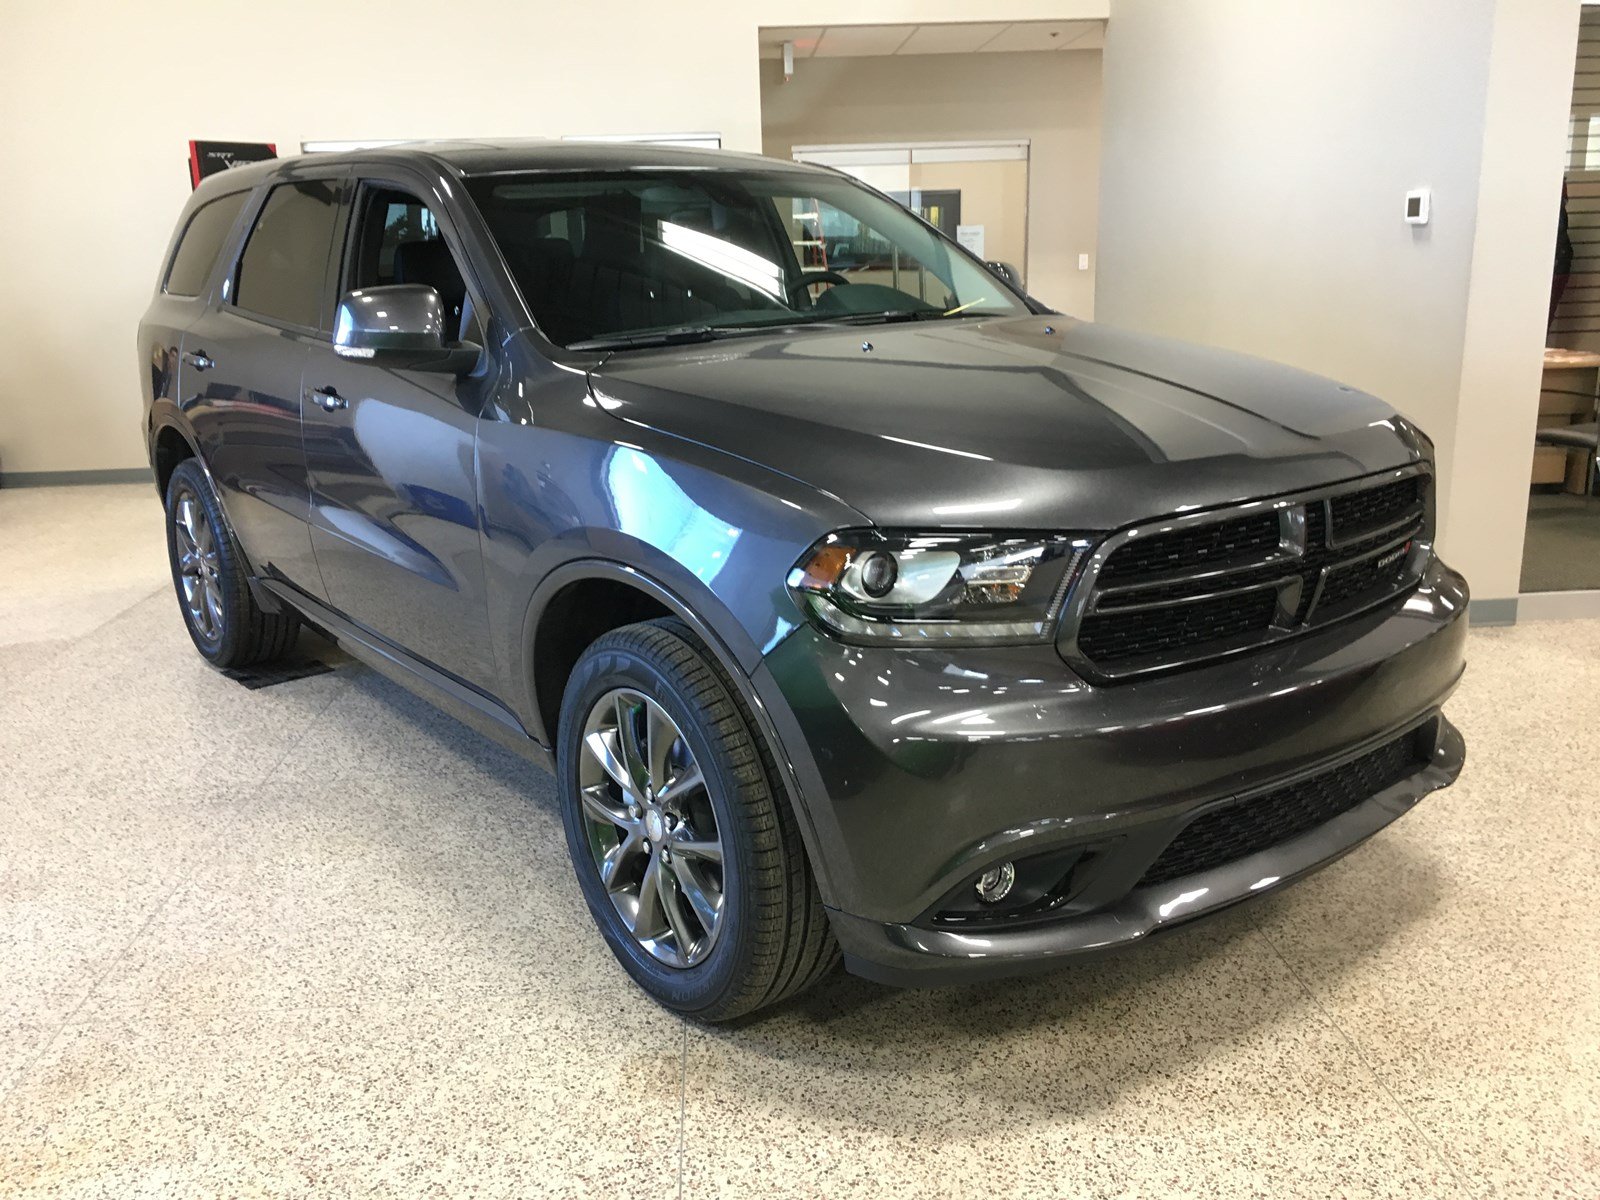 Jun 29, 2021 - the 2021 dodge durango is priced at $38,060 for the... 